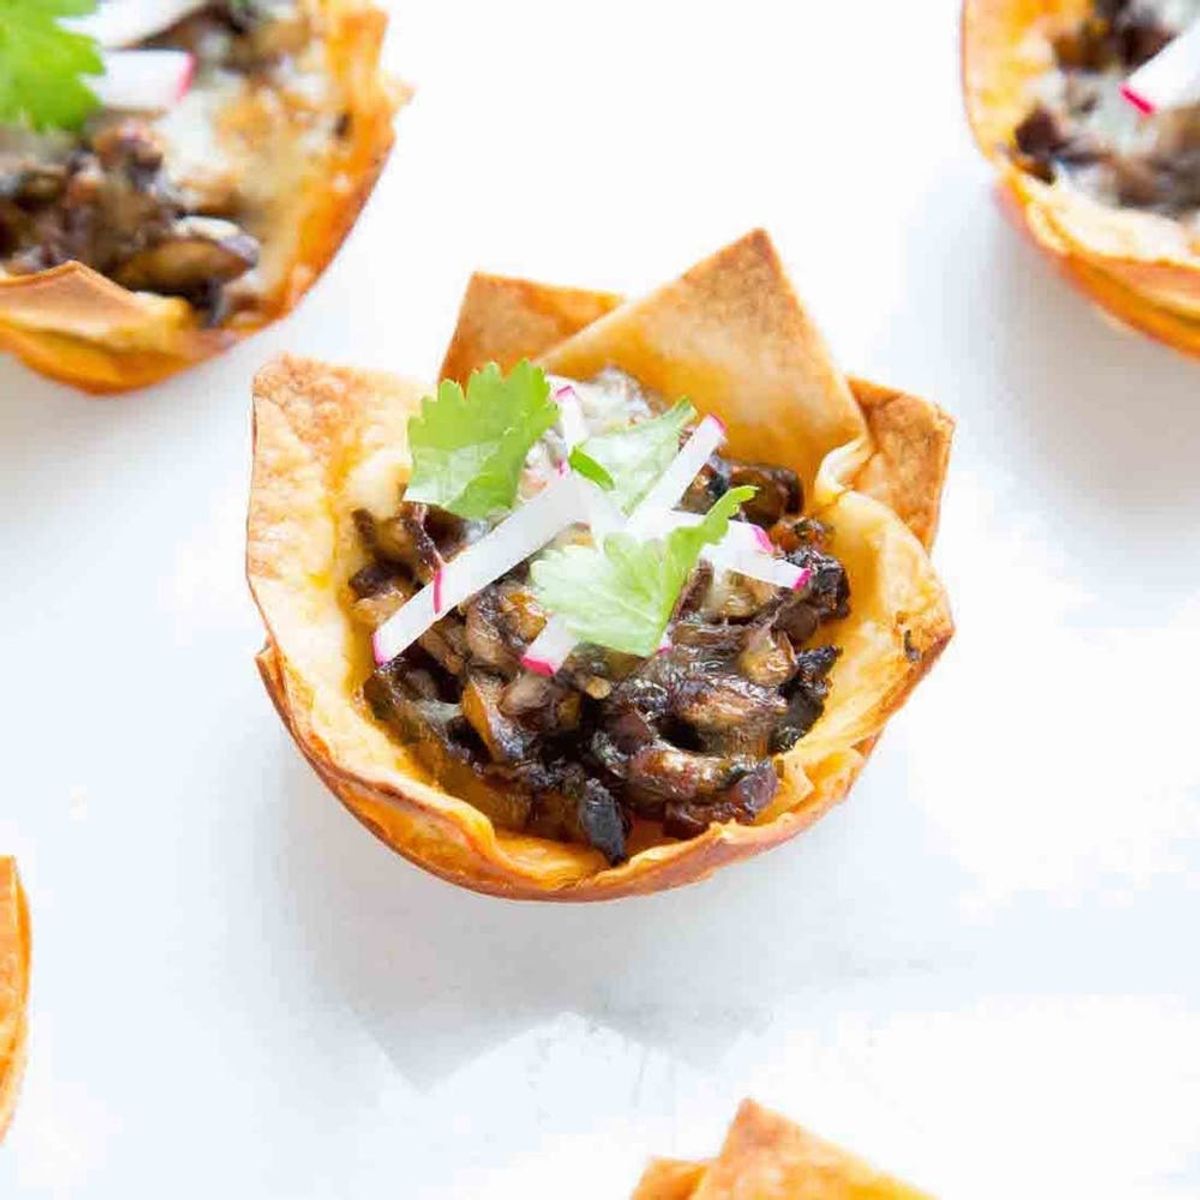 A Meatless New Year’s Eve App: Chipotle Mushroom Taco Bites!